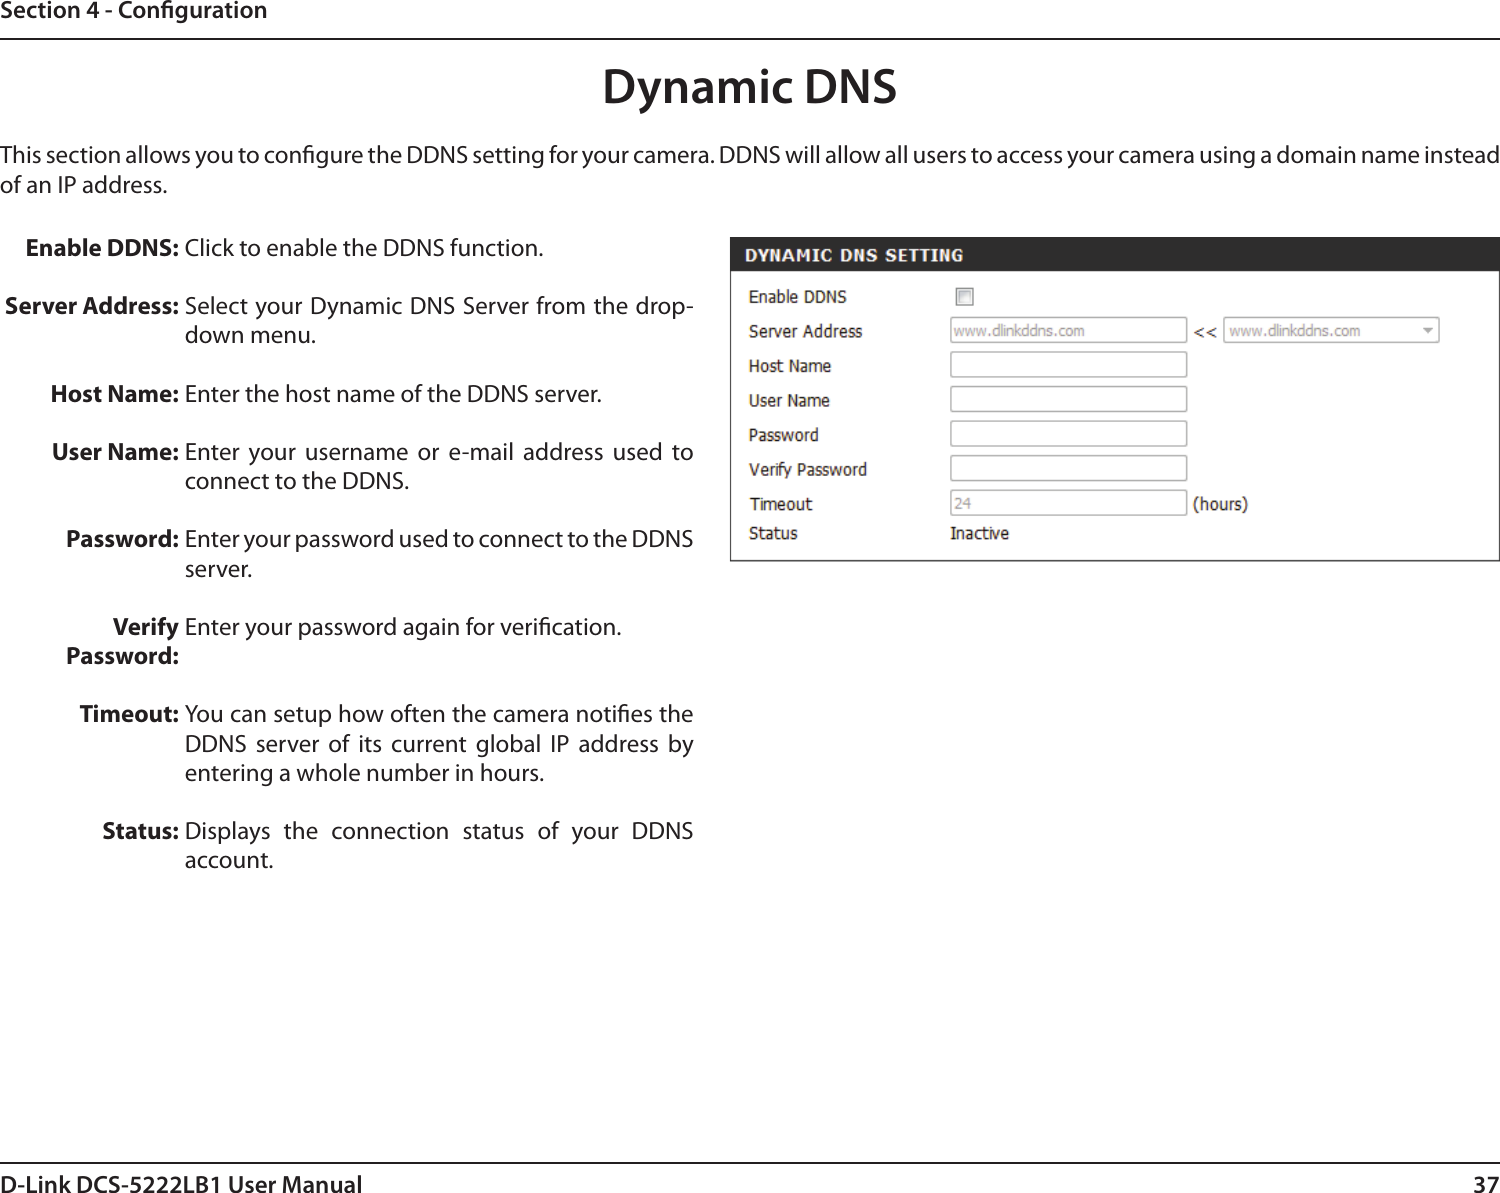 37D-Link DCS-5222LB1 User ManualSection 4 - CongurationDynamic DNSClick to enable the DDNS function.Select your Dynamic DNS Server from the drop-down menu.Enter the host name of the DDNS server.Enter  your  username  or  e-mail  address  used  to connect to the DDNS.Enter your password used to connect to the DDNS server.Enter your password again for verication.You can setup how often the camera noties the DDNS  server  of  its  current  global  IP  address  by entering a whole number in hours. Displays  the  connection  status  of  your  DDNS account.Enable DDNS:Server Address: Host Name:User Name:Password:VerifyPassword:Timeout:Status:This section allows you to congure the DDNS setting for your camera. DDNS will allow all users to access your camera using a domain name instead of an IP address.